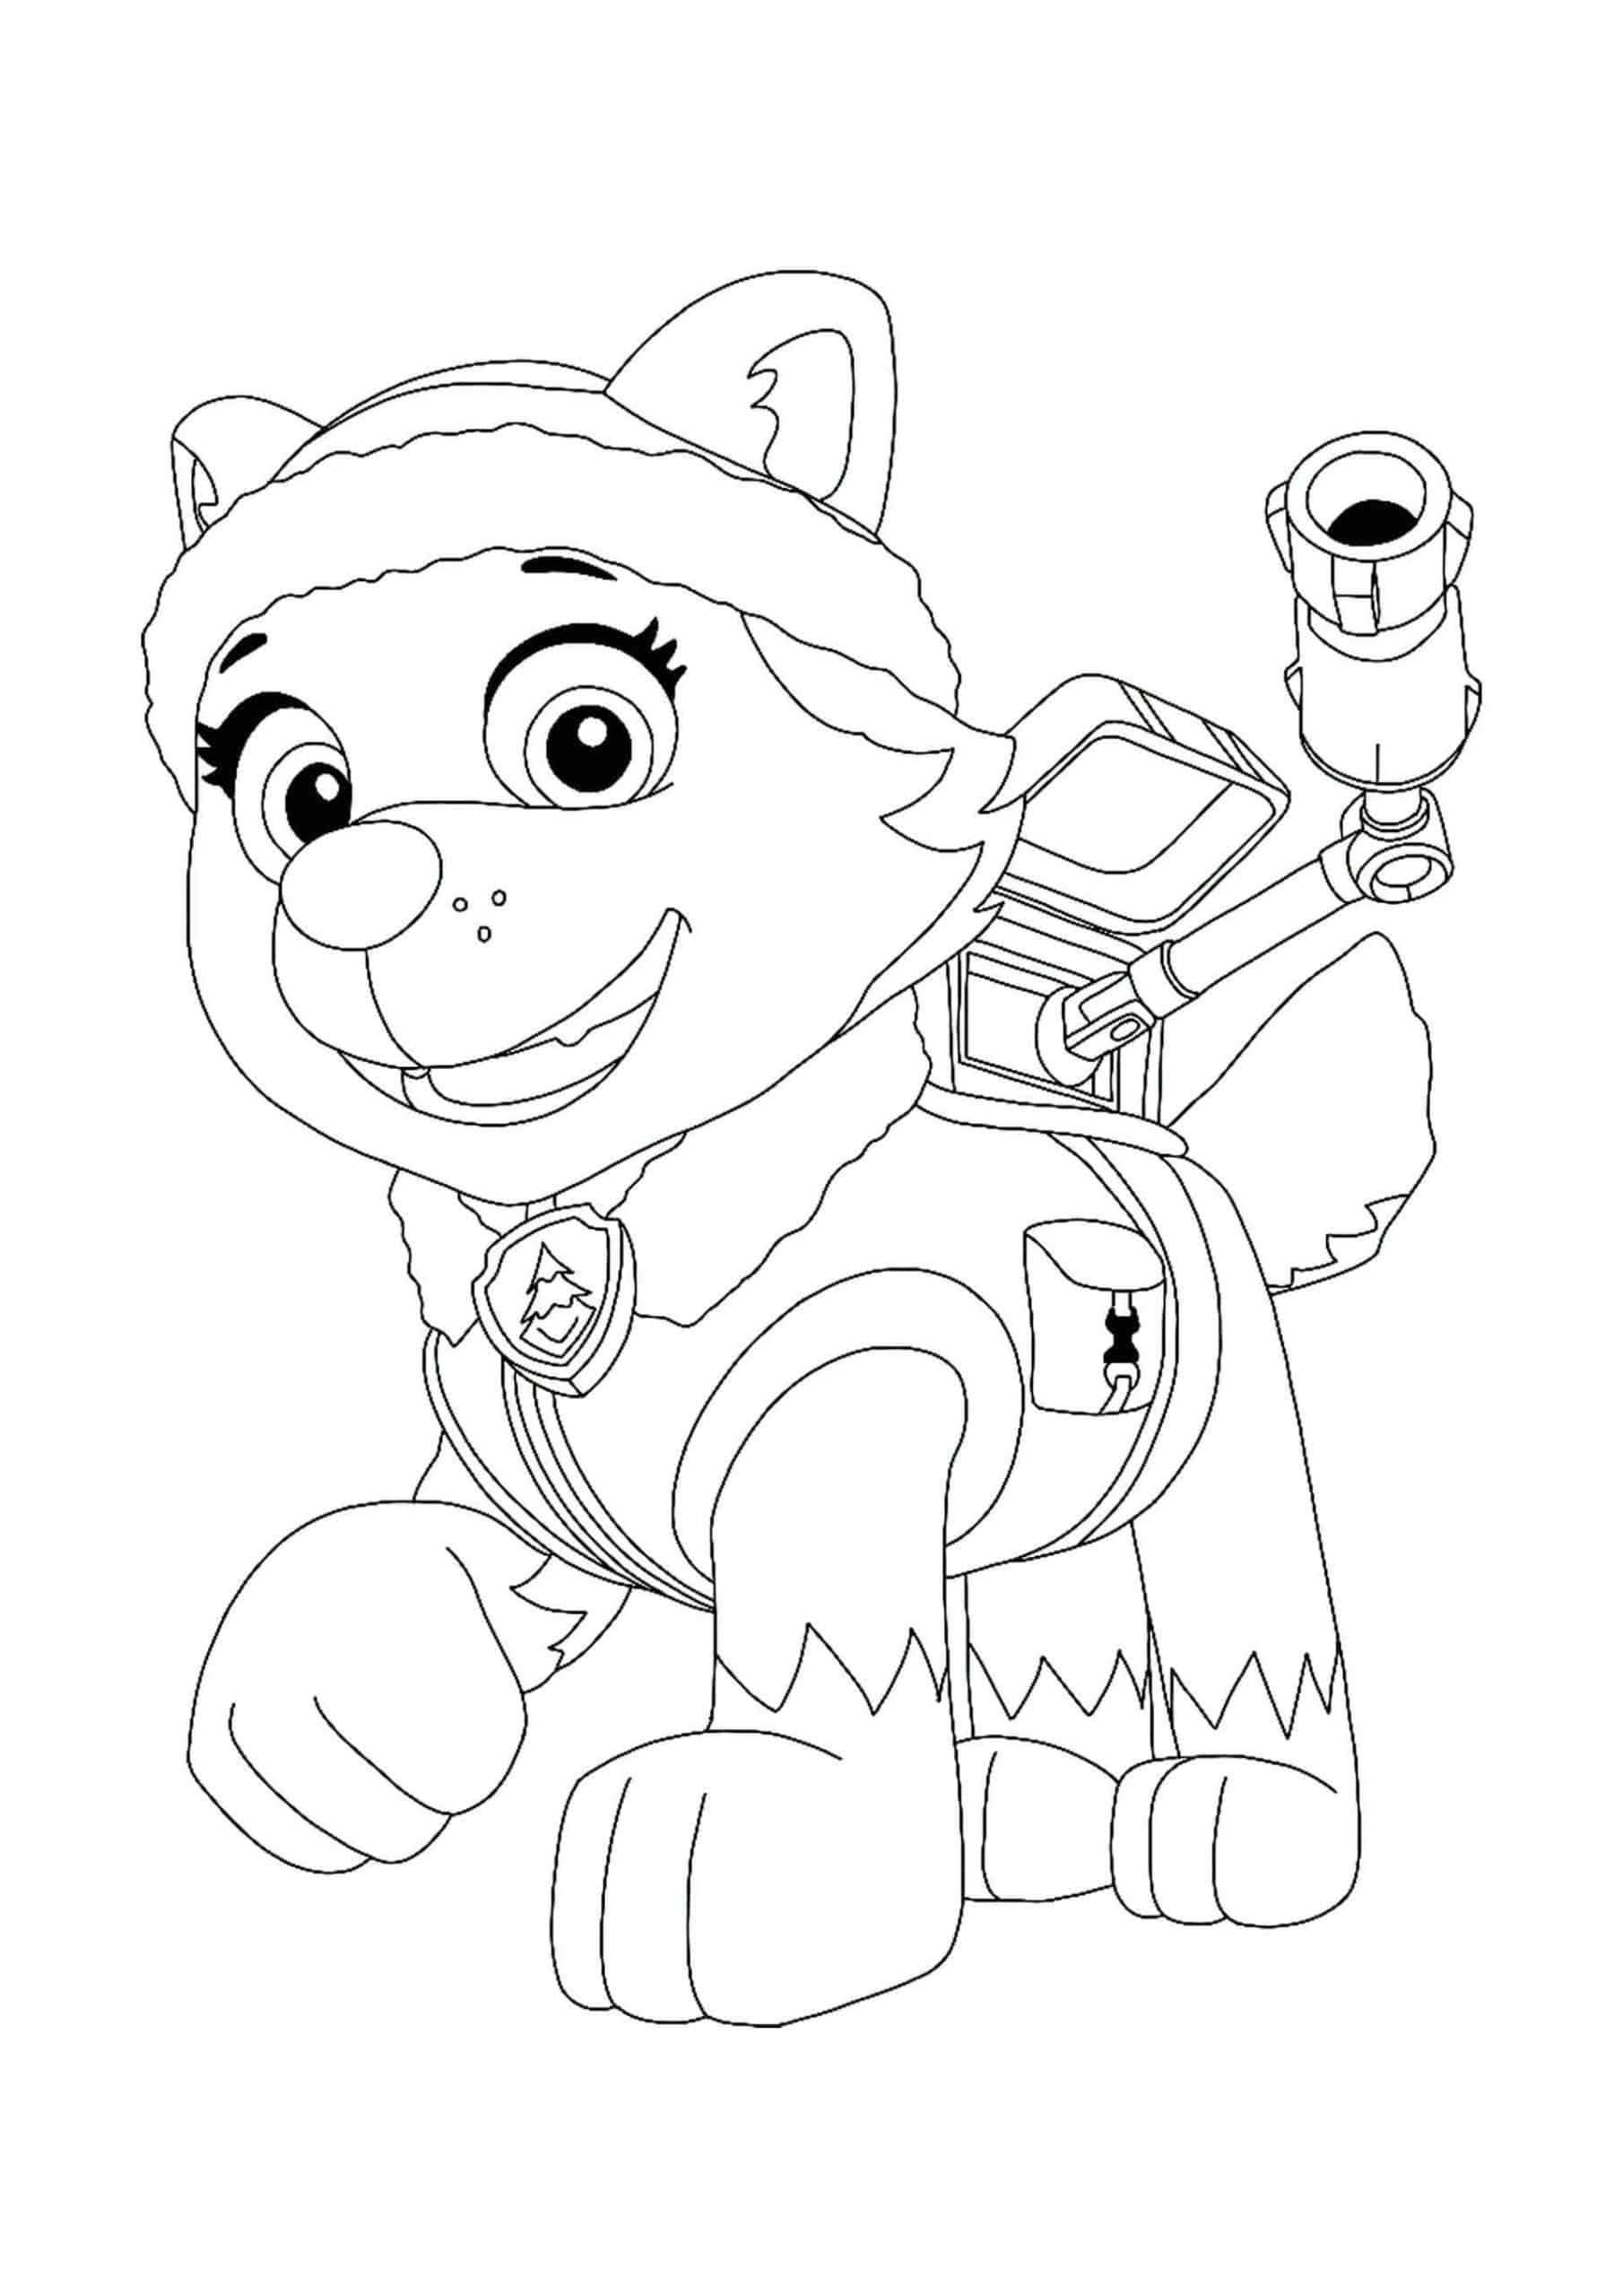 Download Paw Patrol Everest Coloring Pages - Coloring Home